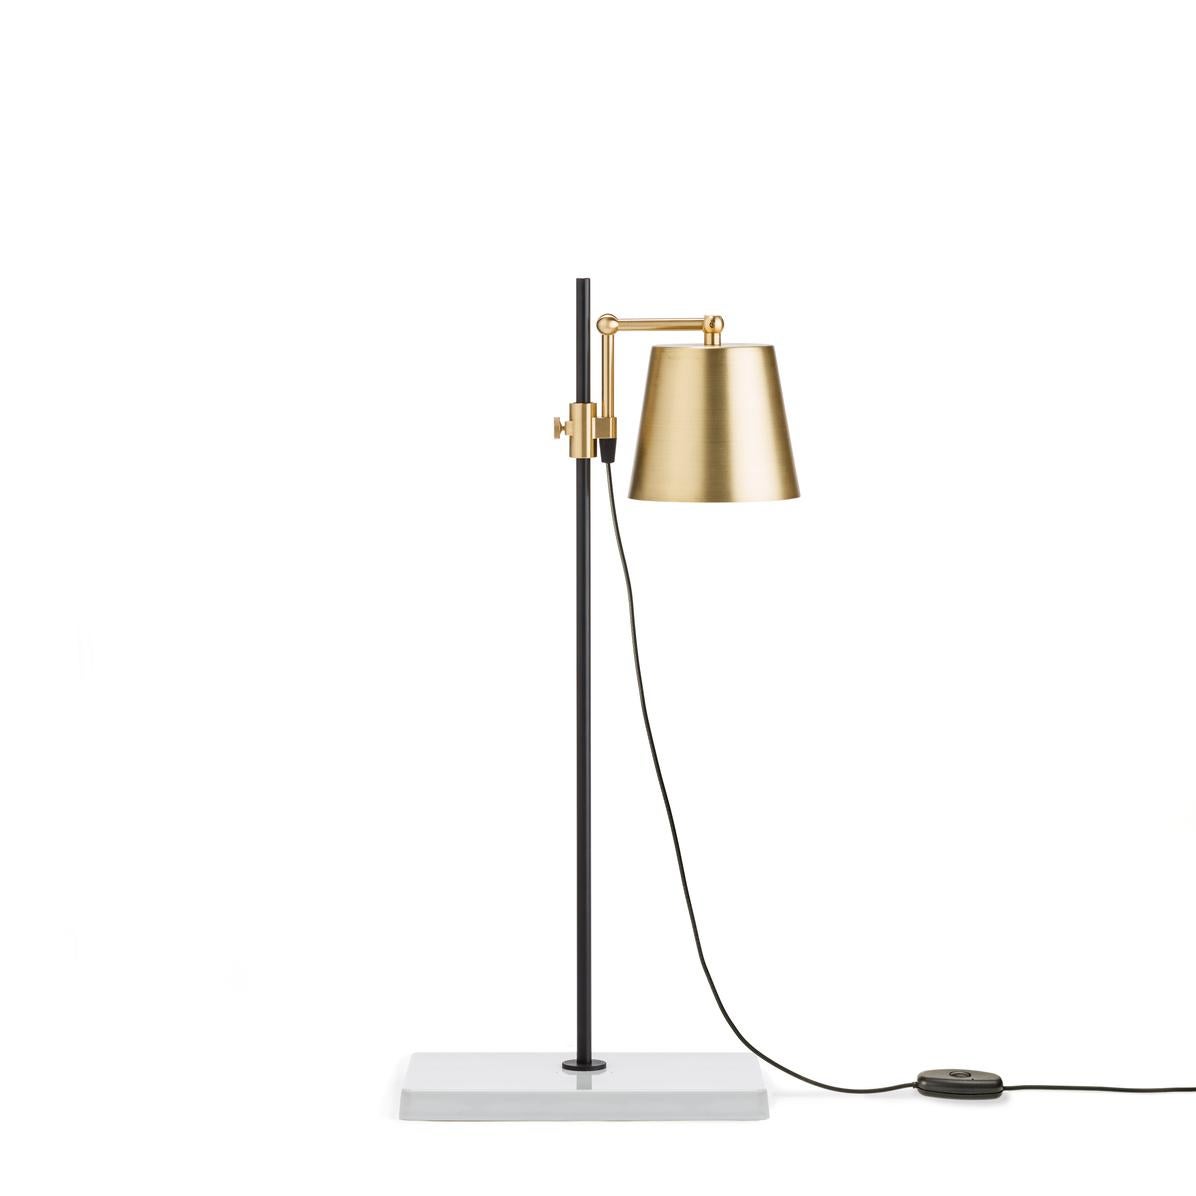 Table lamp designed by Anatomy Design in 2010. 

The lab light design came about from a genuine fascination with laboratory equipment and with all those fantastic clamps and levers — the perfect place to start designing a multi-functional lamp.

The